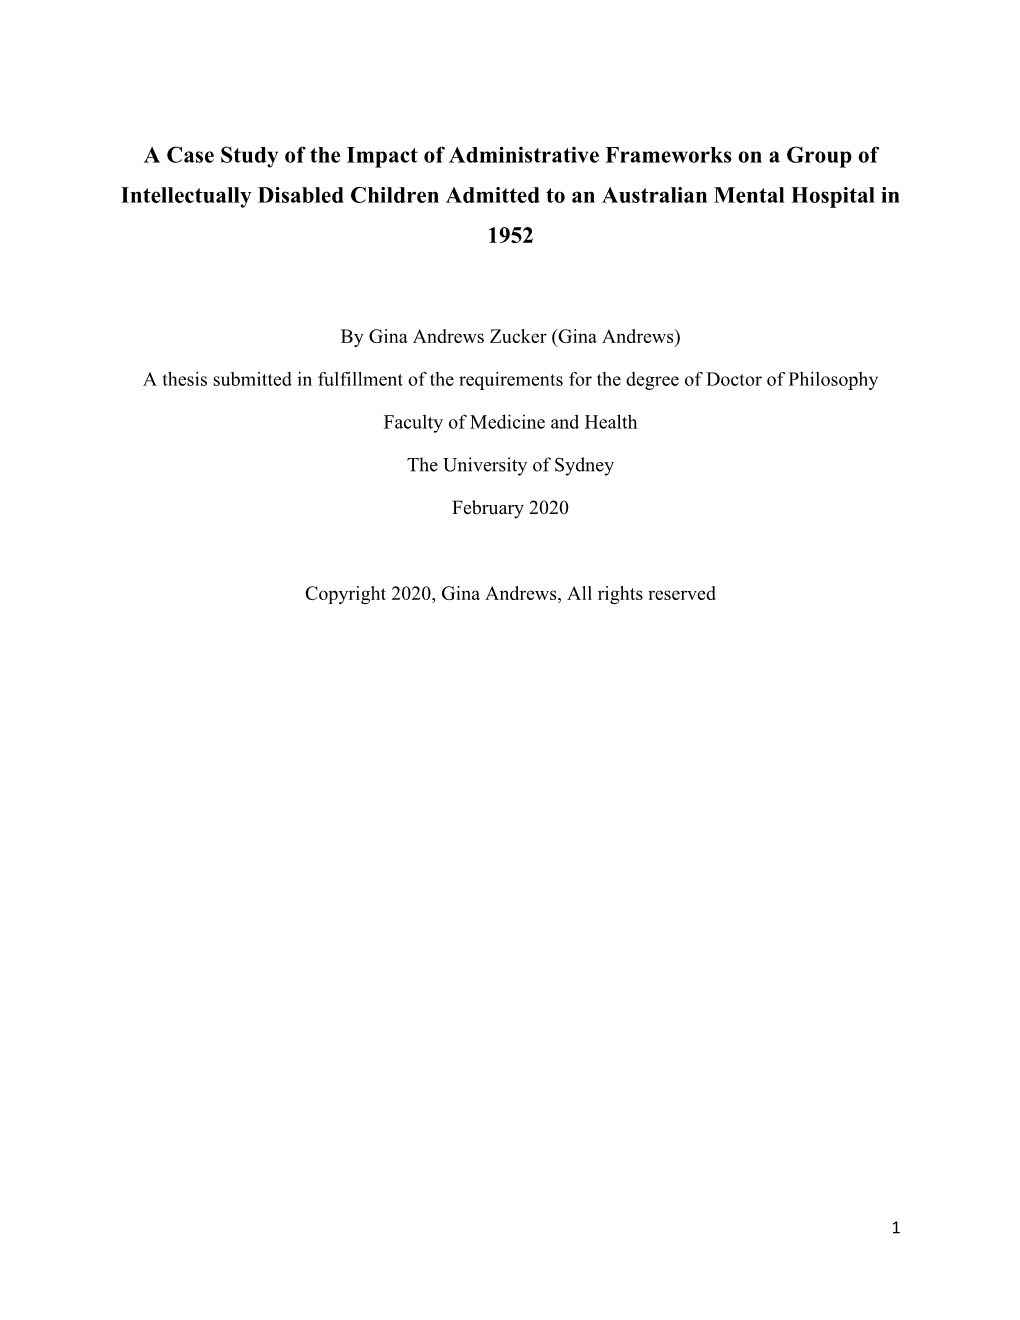 A Case Study of the Impact of Administrative Frameworks on a Group of Intellectually Disabled Children Admitted to an Australian Mental Hospital in 1952